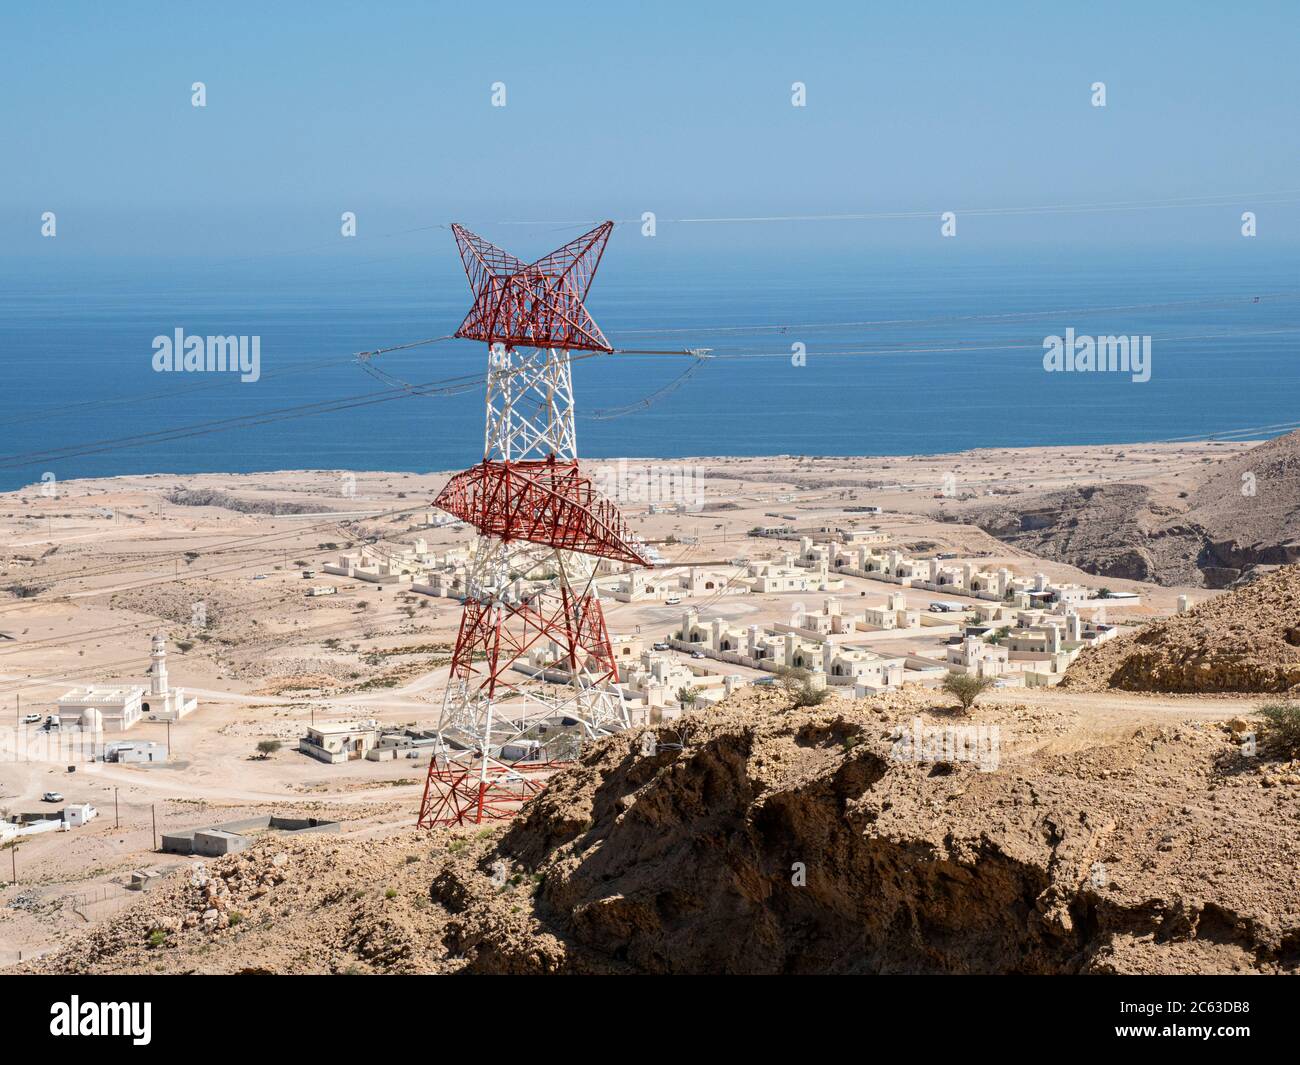 High tension power lines overlooking Wadi Fins, Sultanate of Oman. Stock Photo